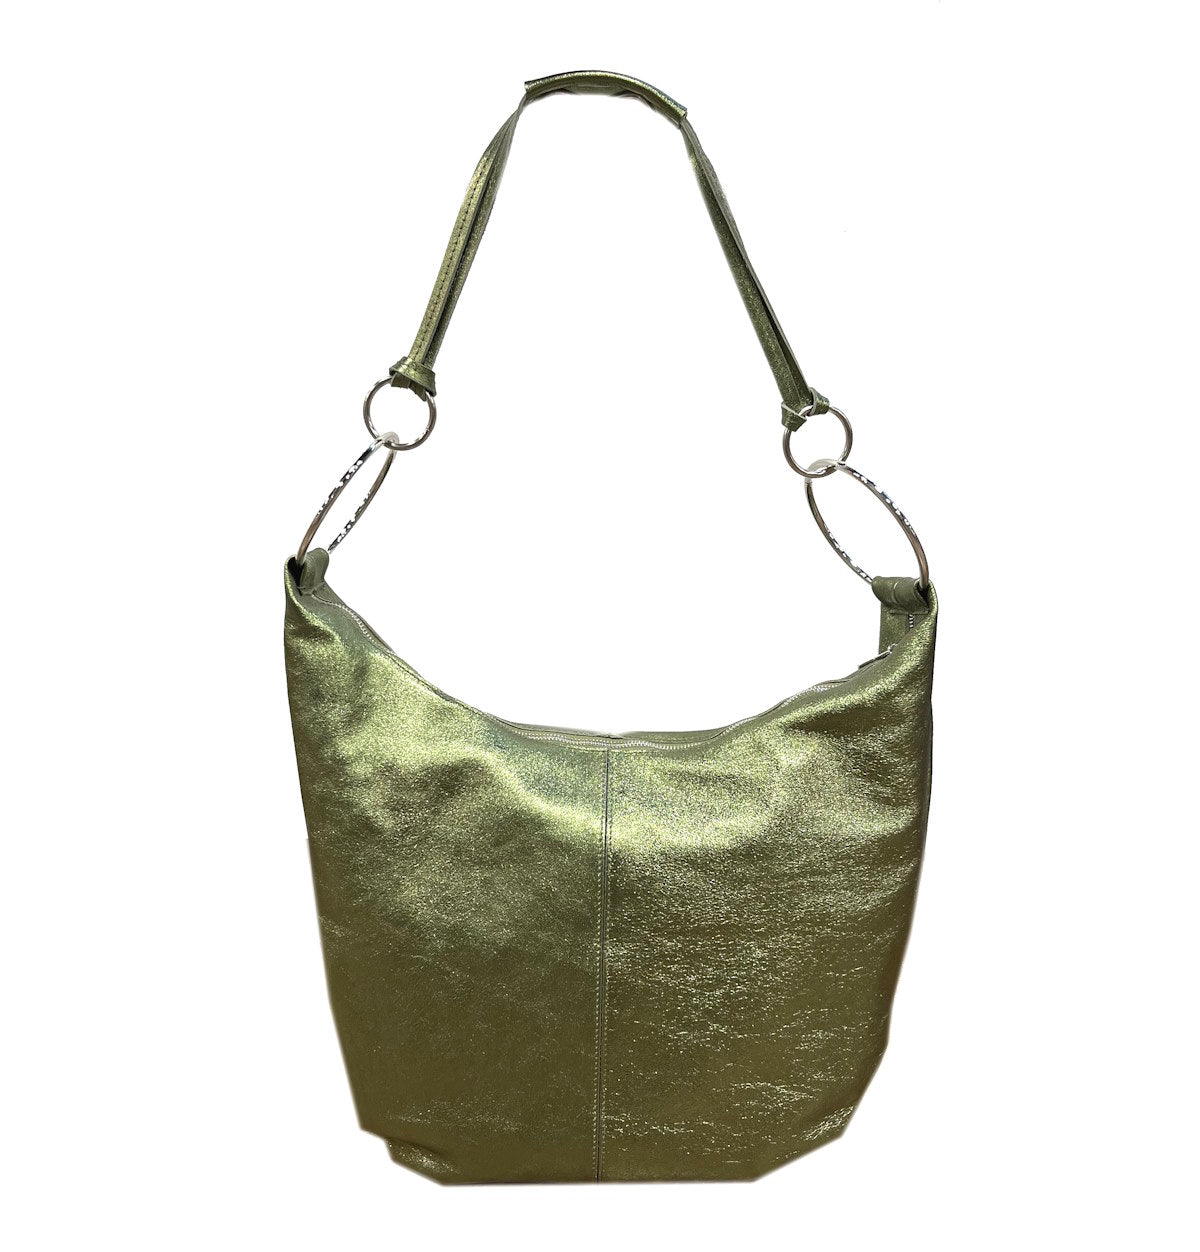 Genuine leather shoulder bag, for women, Made in Italy, art. 112441